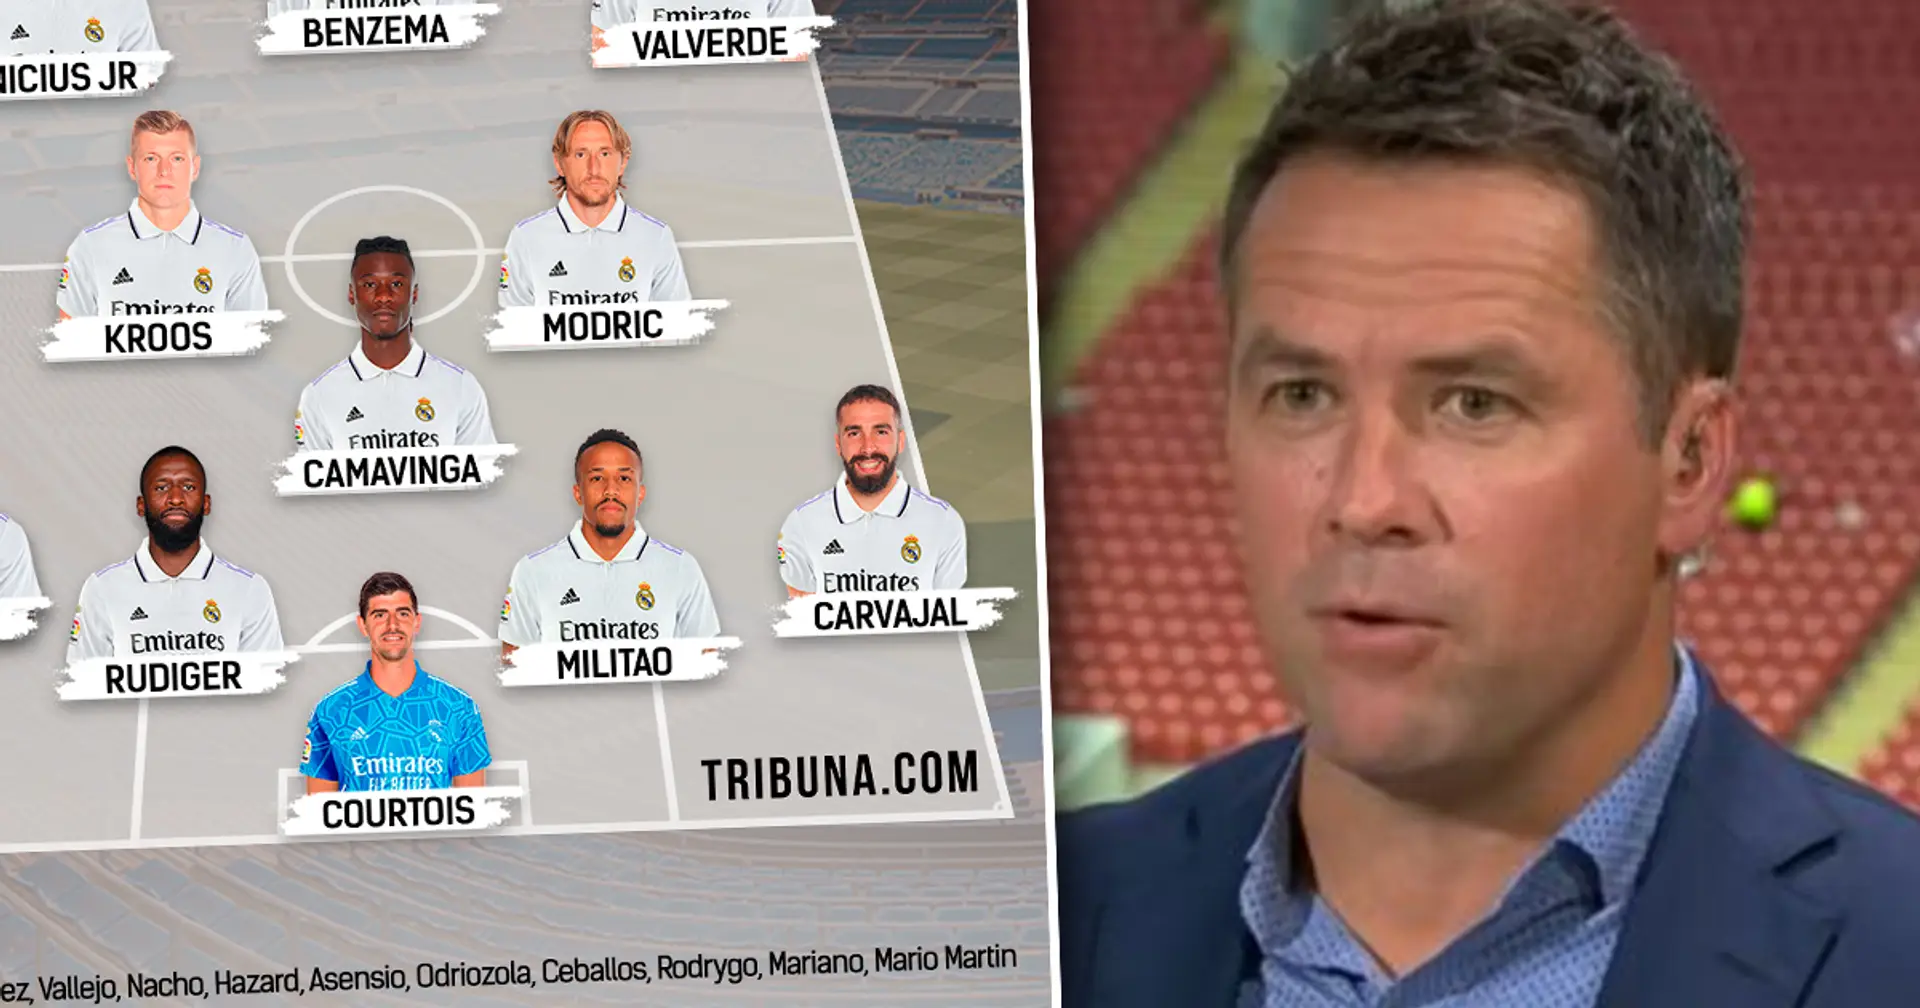 Michael Owen names one thing that 'shocked' him ahead of Clasico – it strongly impacted the game